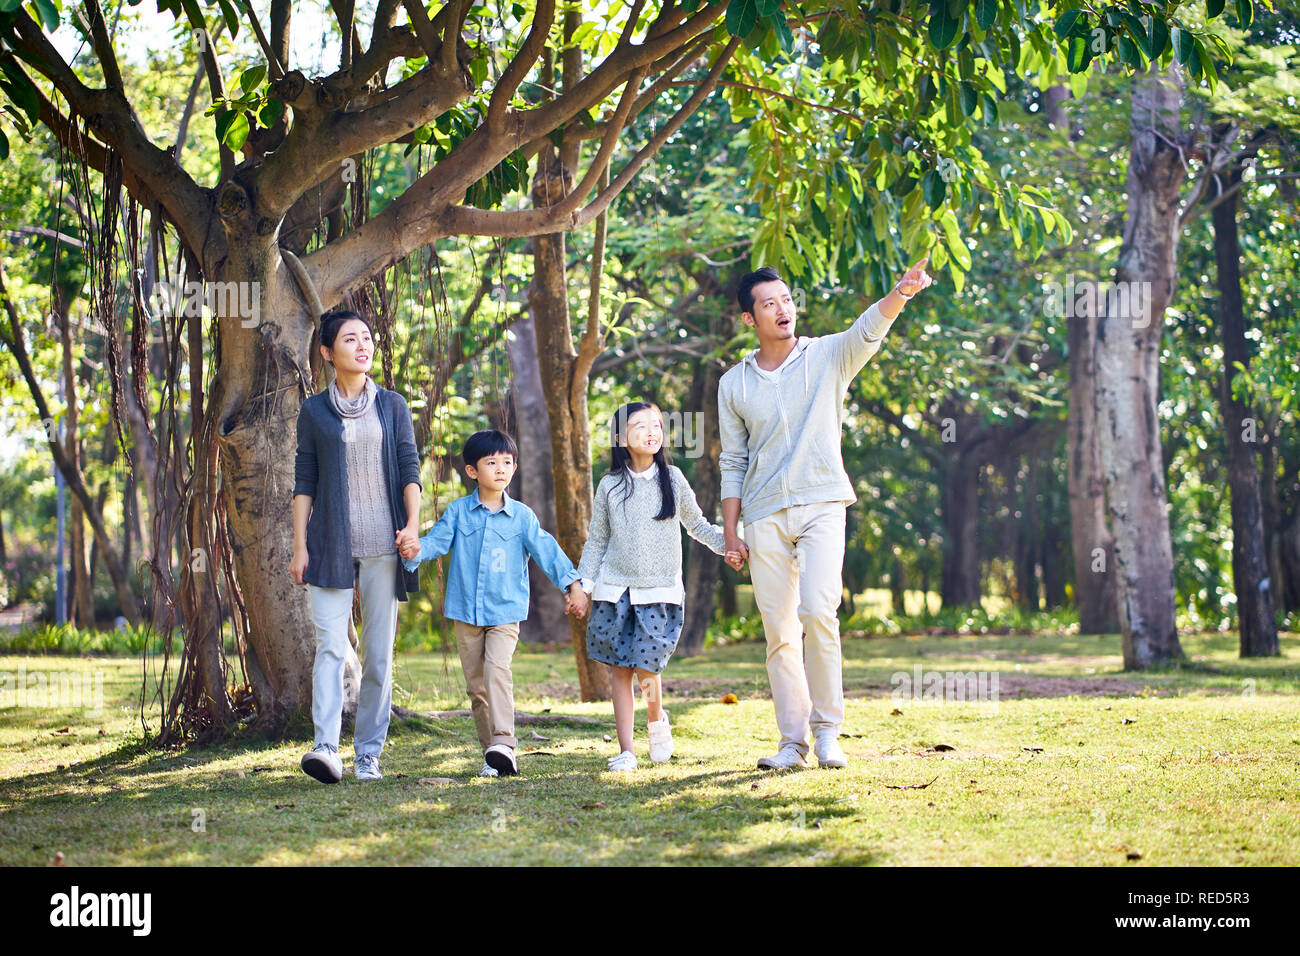 asian family with two children walking hand in hand outdoors in park. Stock Photo